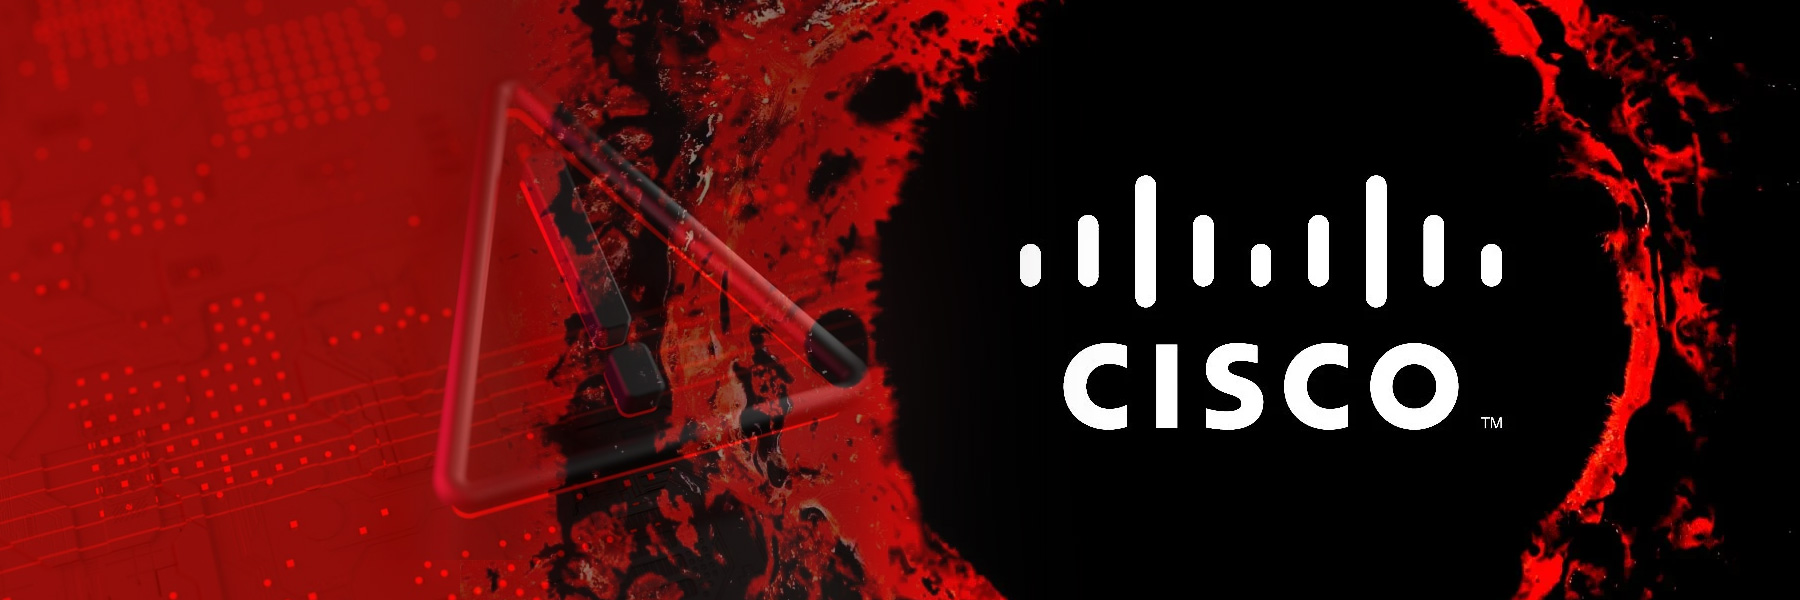 Cisco Confirms Being Hacked by Yanluowang Ransomware Gang